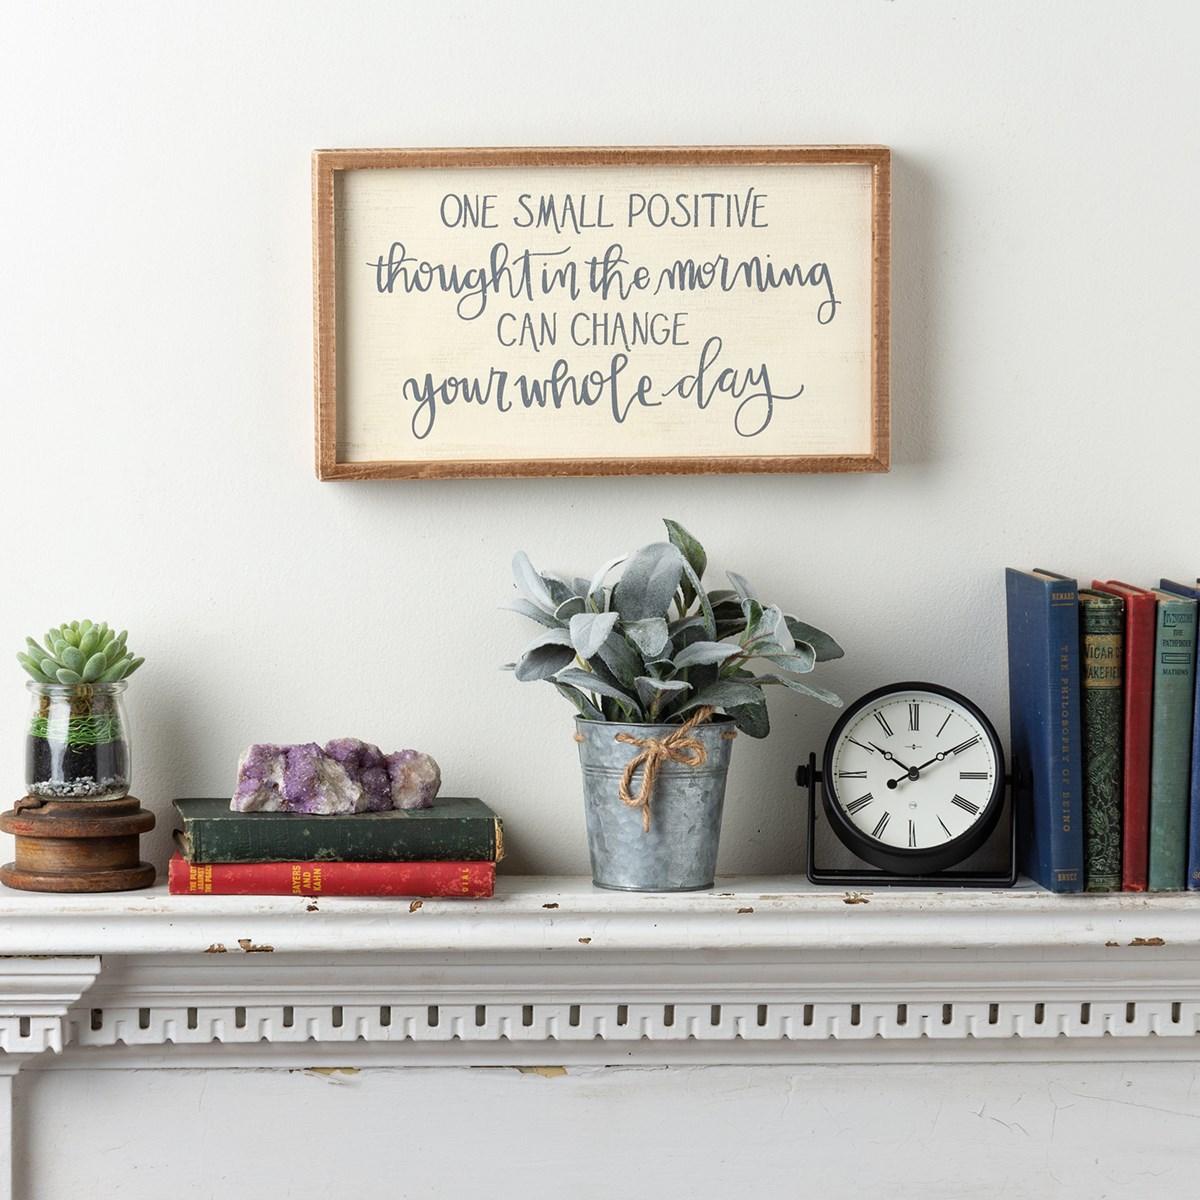 Change Your Whole Day Inset Box Sign - Wood